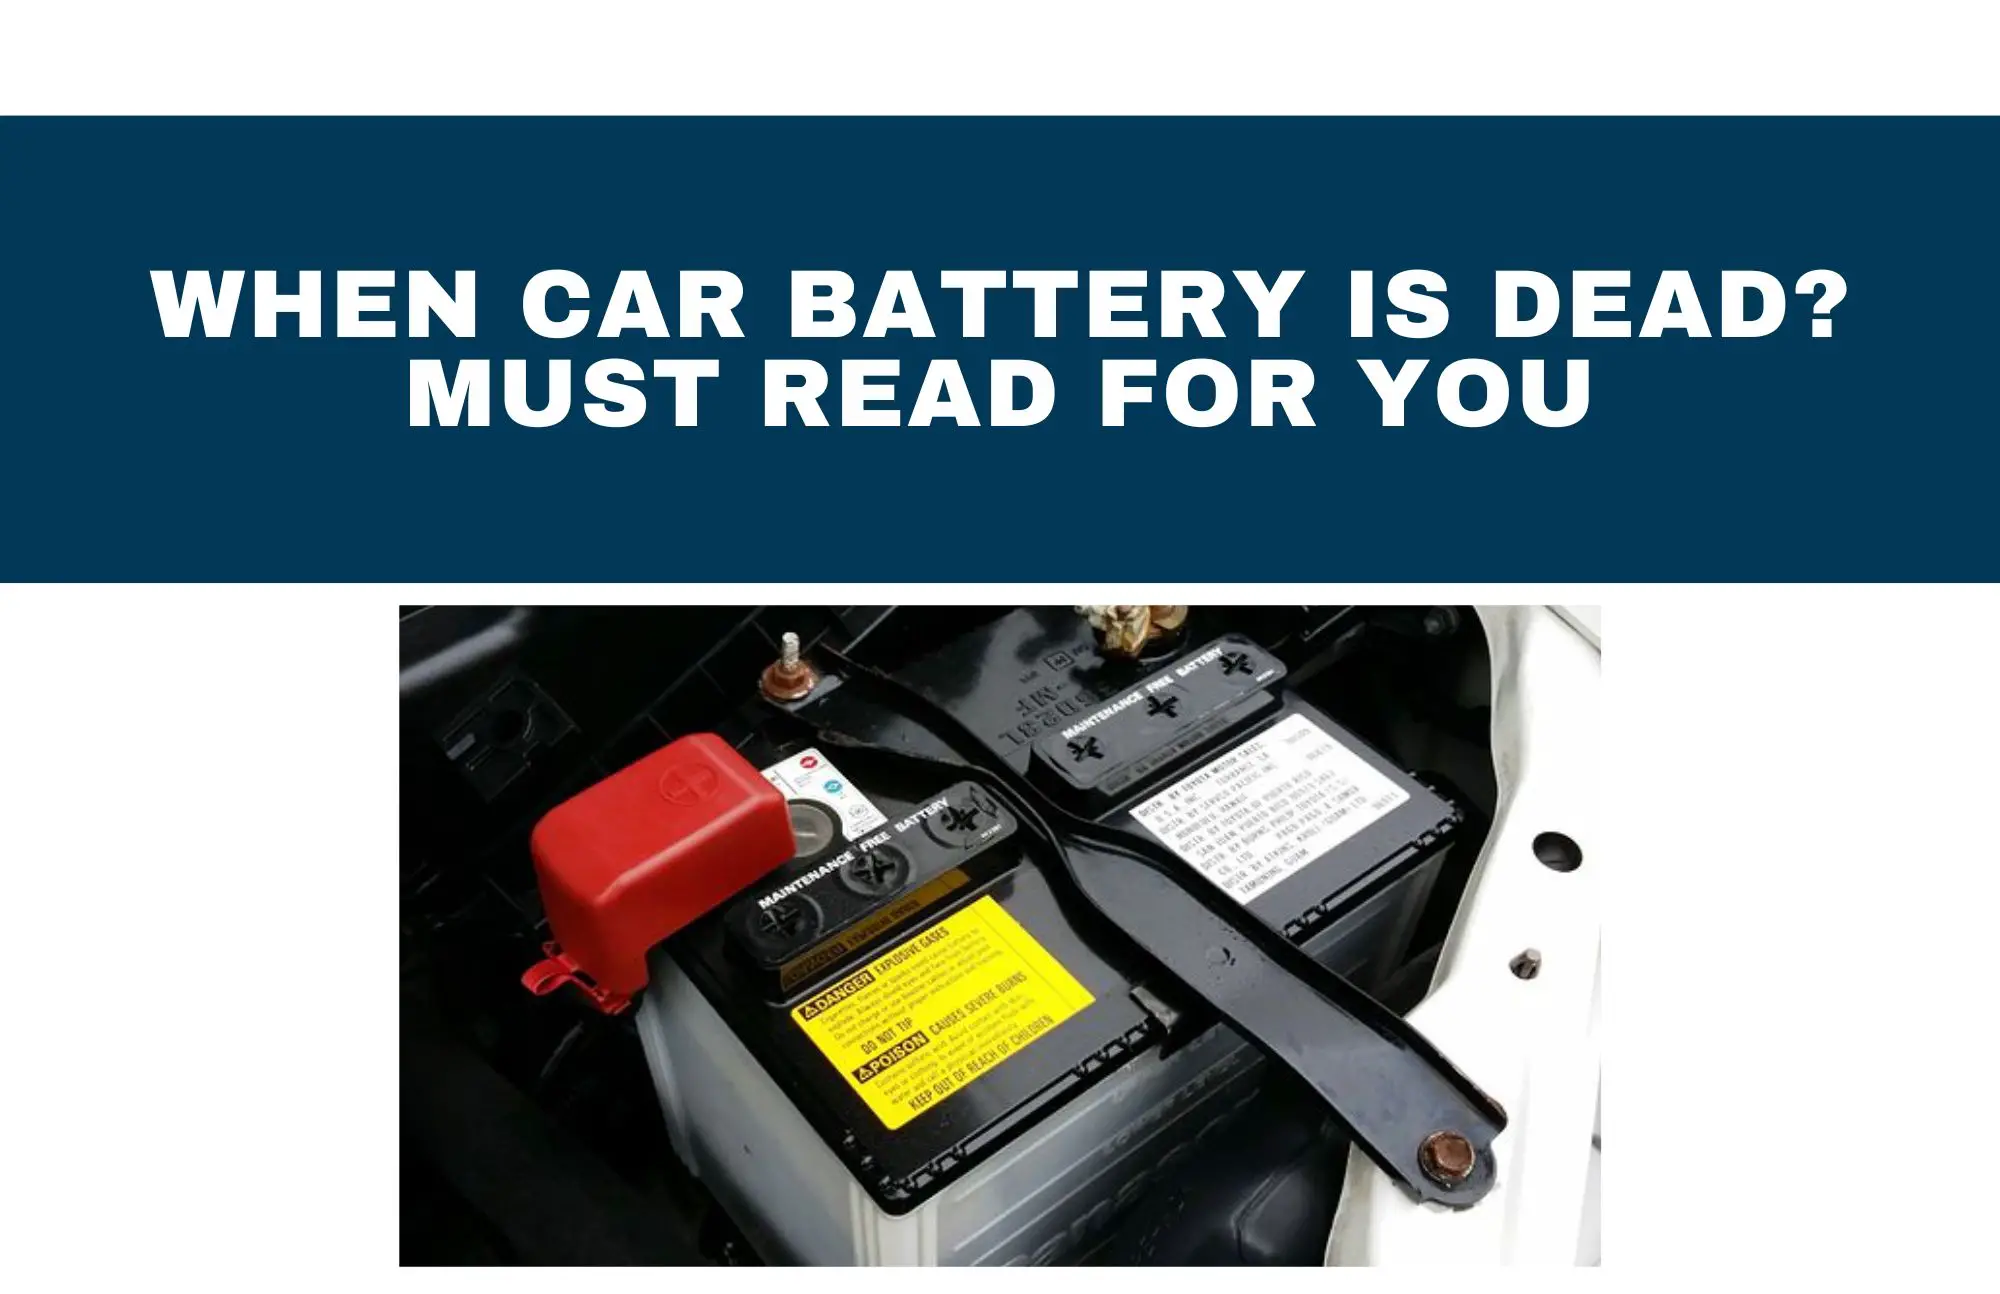 When Car Battery Is Dead? Must Read For You